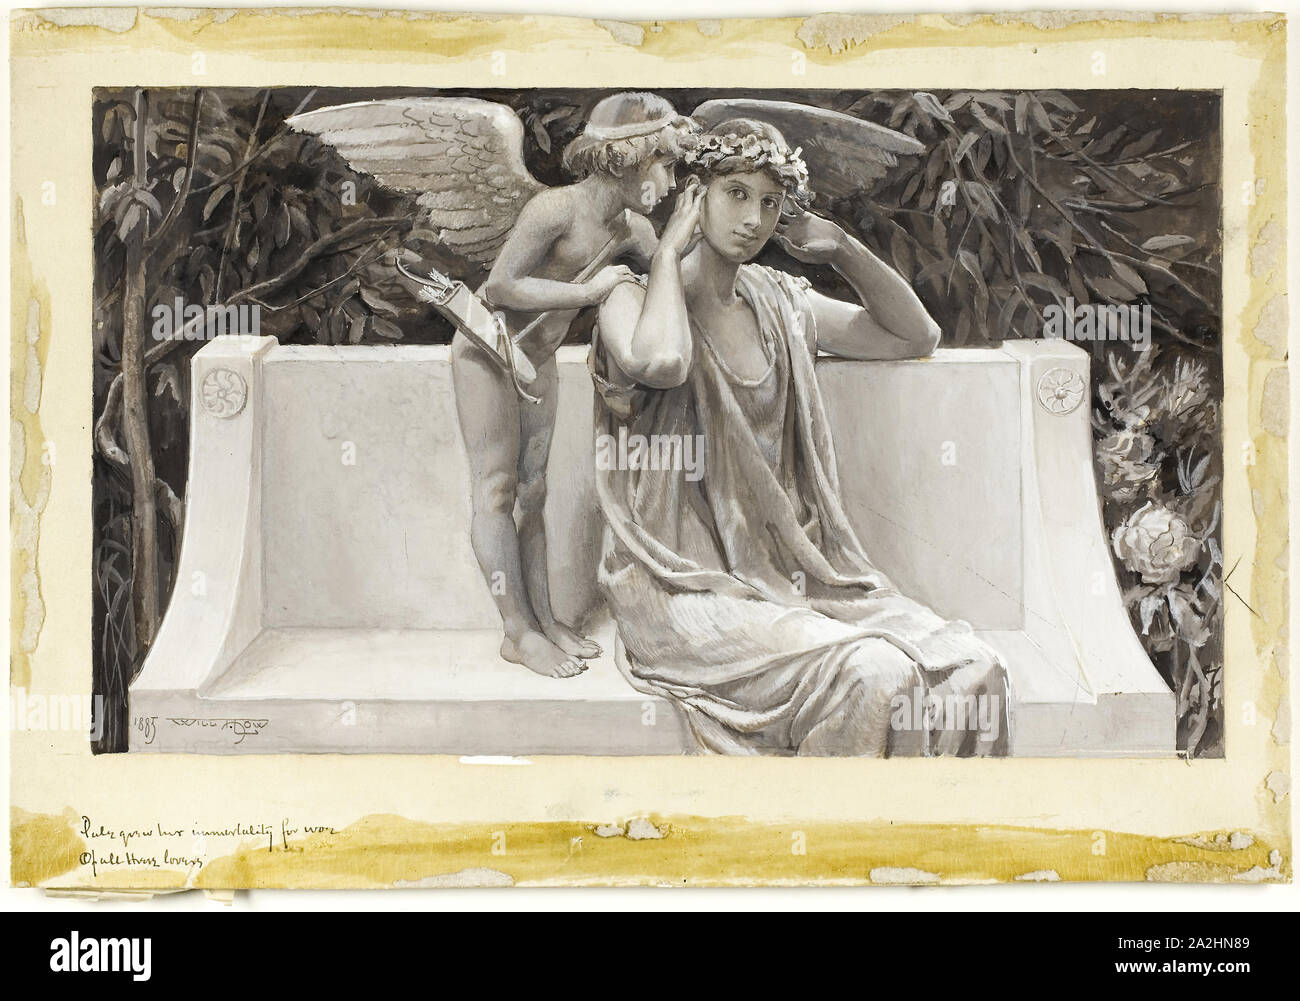 Pale Grew Her Immortality, For Woe of All These Lovers, 1885, Will Hicock Low, American, 1853-1932, United States, Brown and white gouache on cream wood-pulp laminate board, 276 x 401 mm Stock Photo